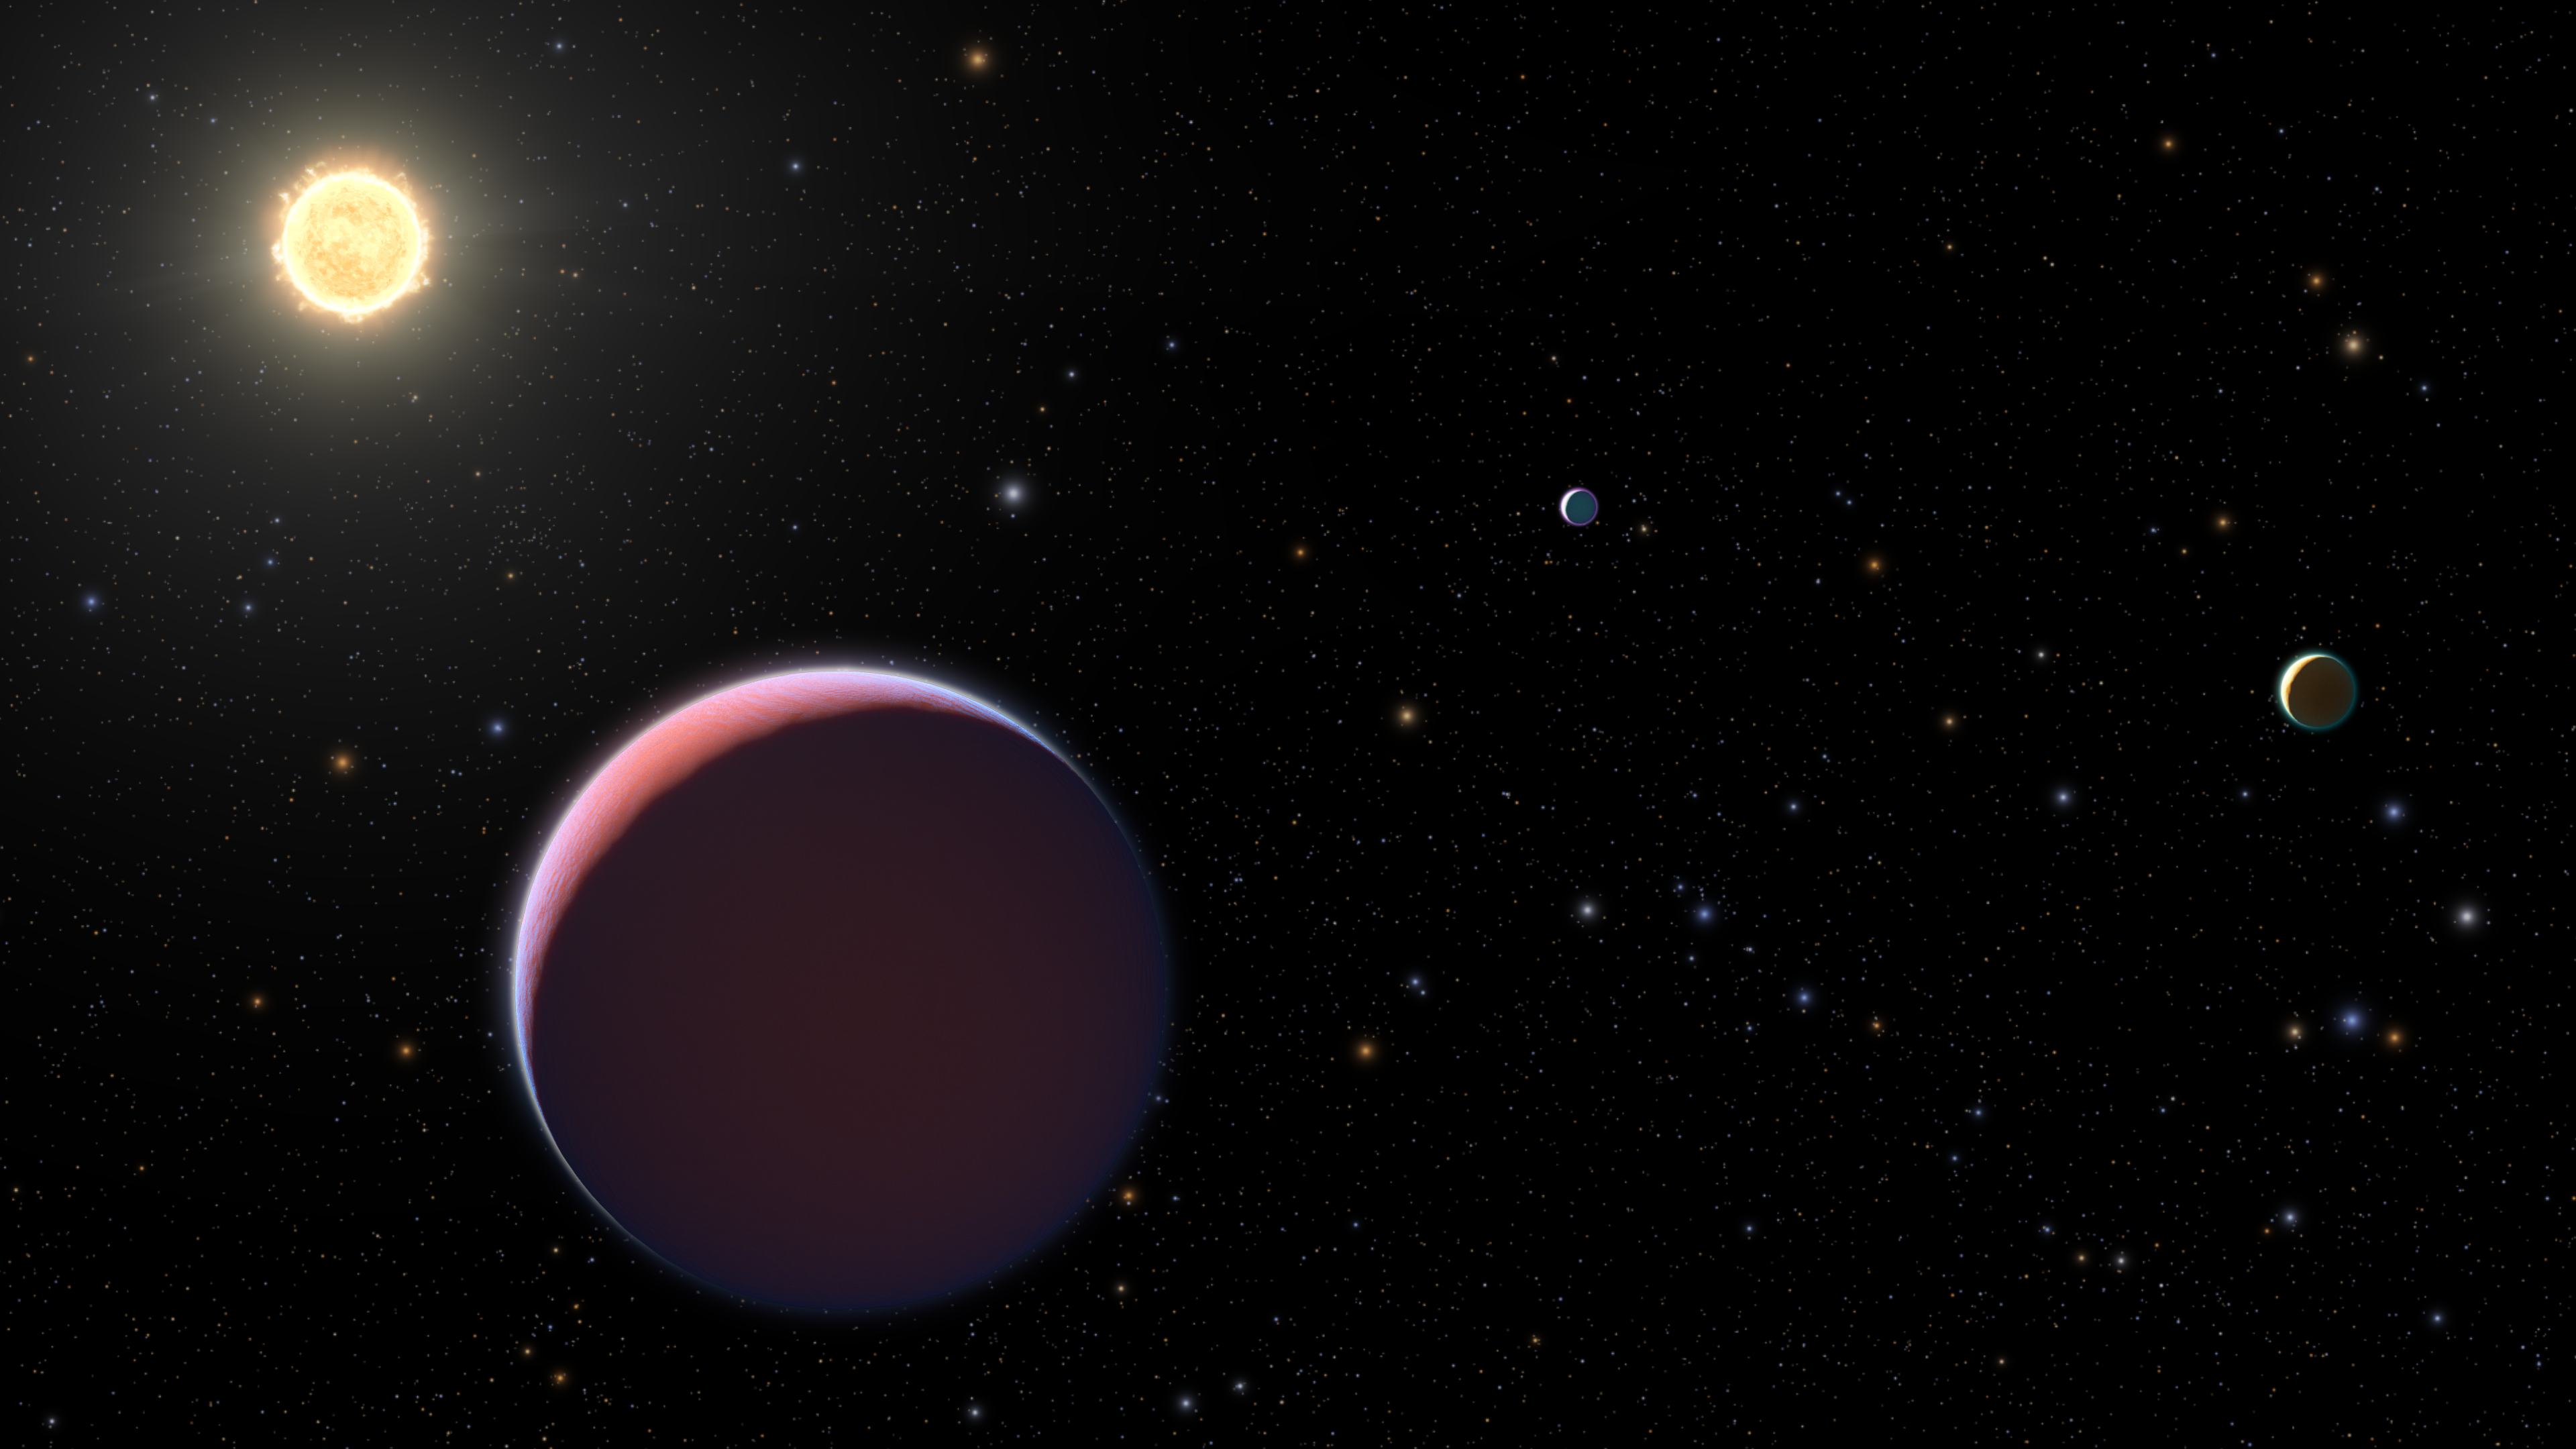 illustration of a pinkish planet against a black background